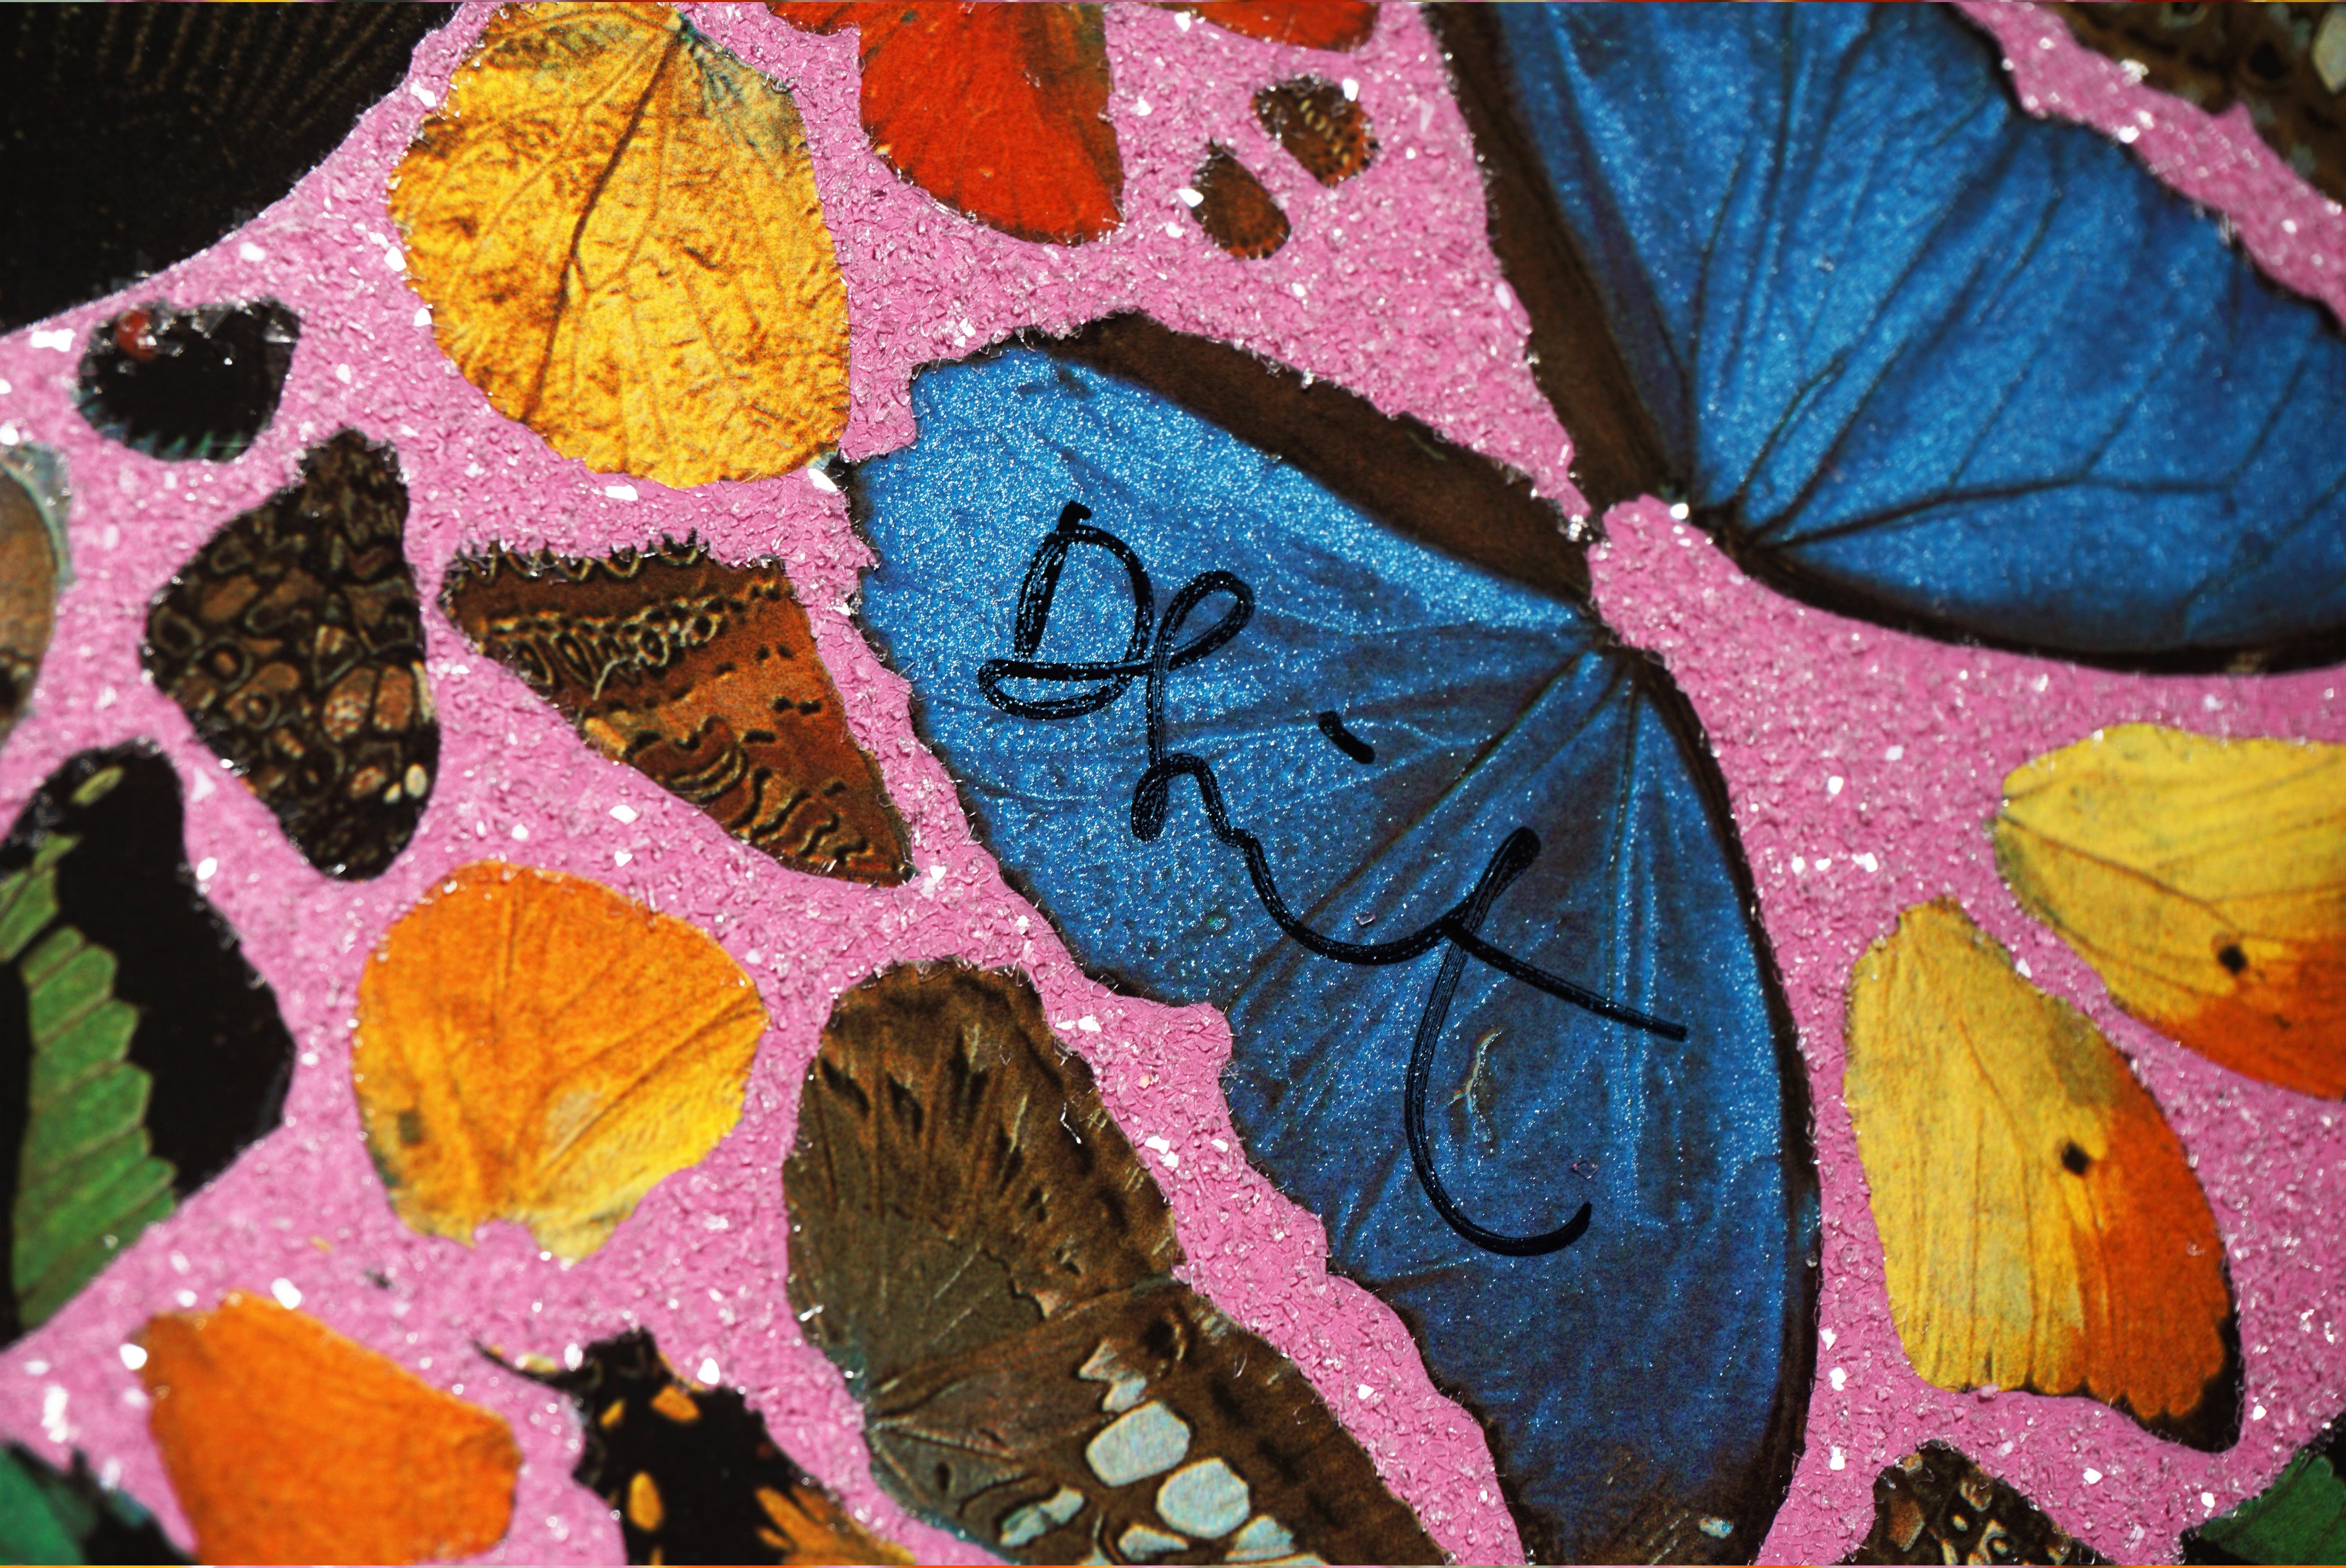 Pink Butterfly 'Cathedral Print, Palais des Papes' with Diamond Dust 3